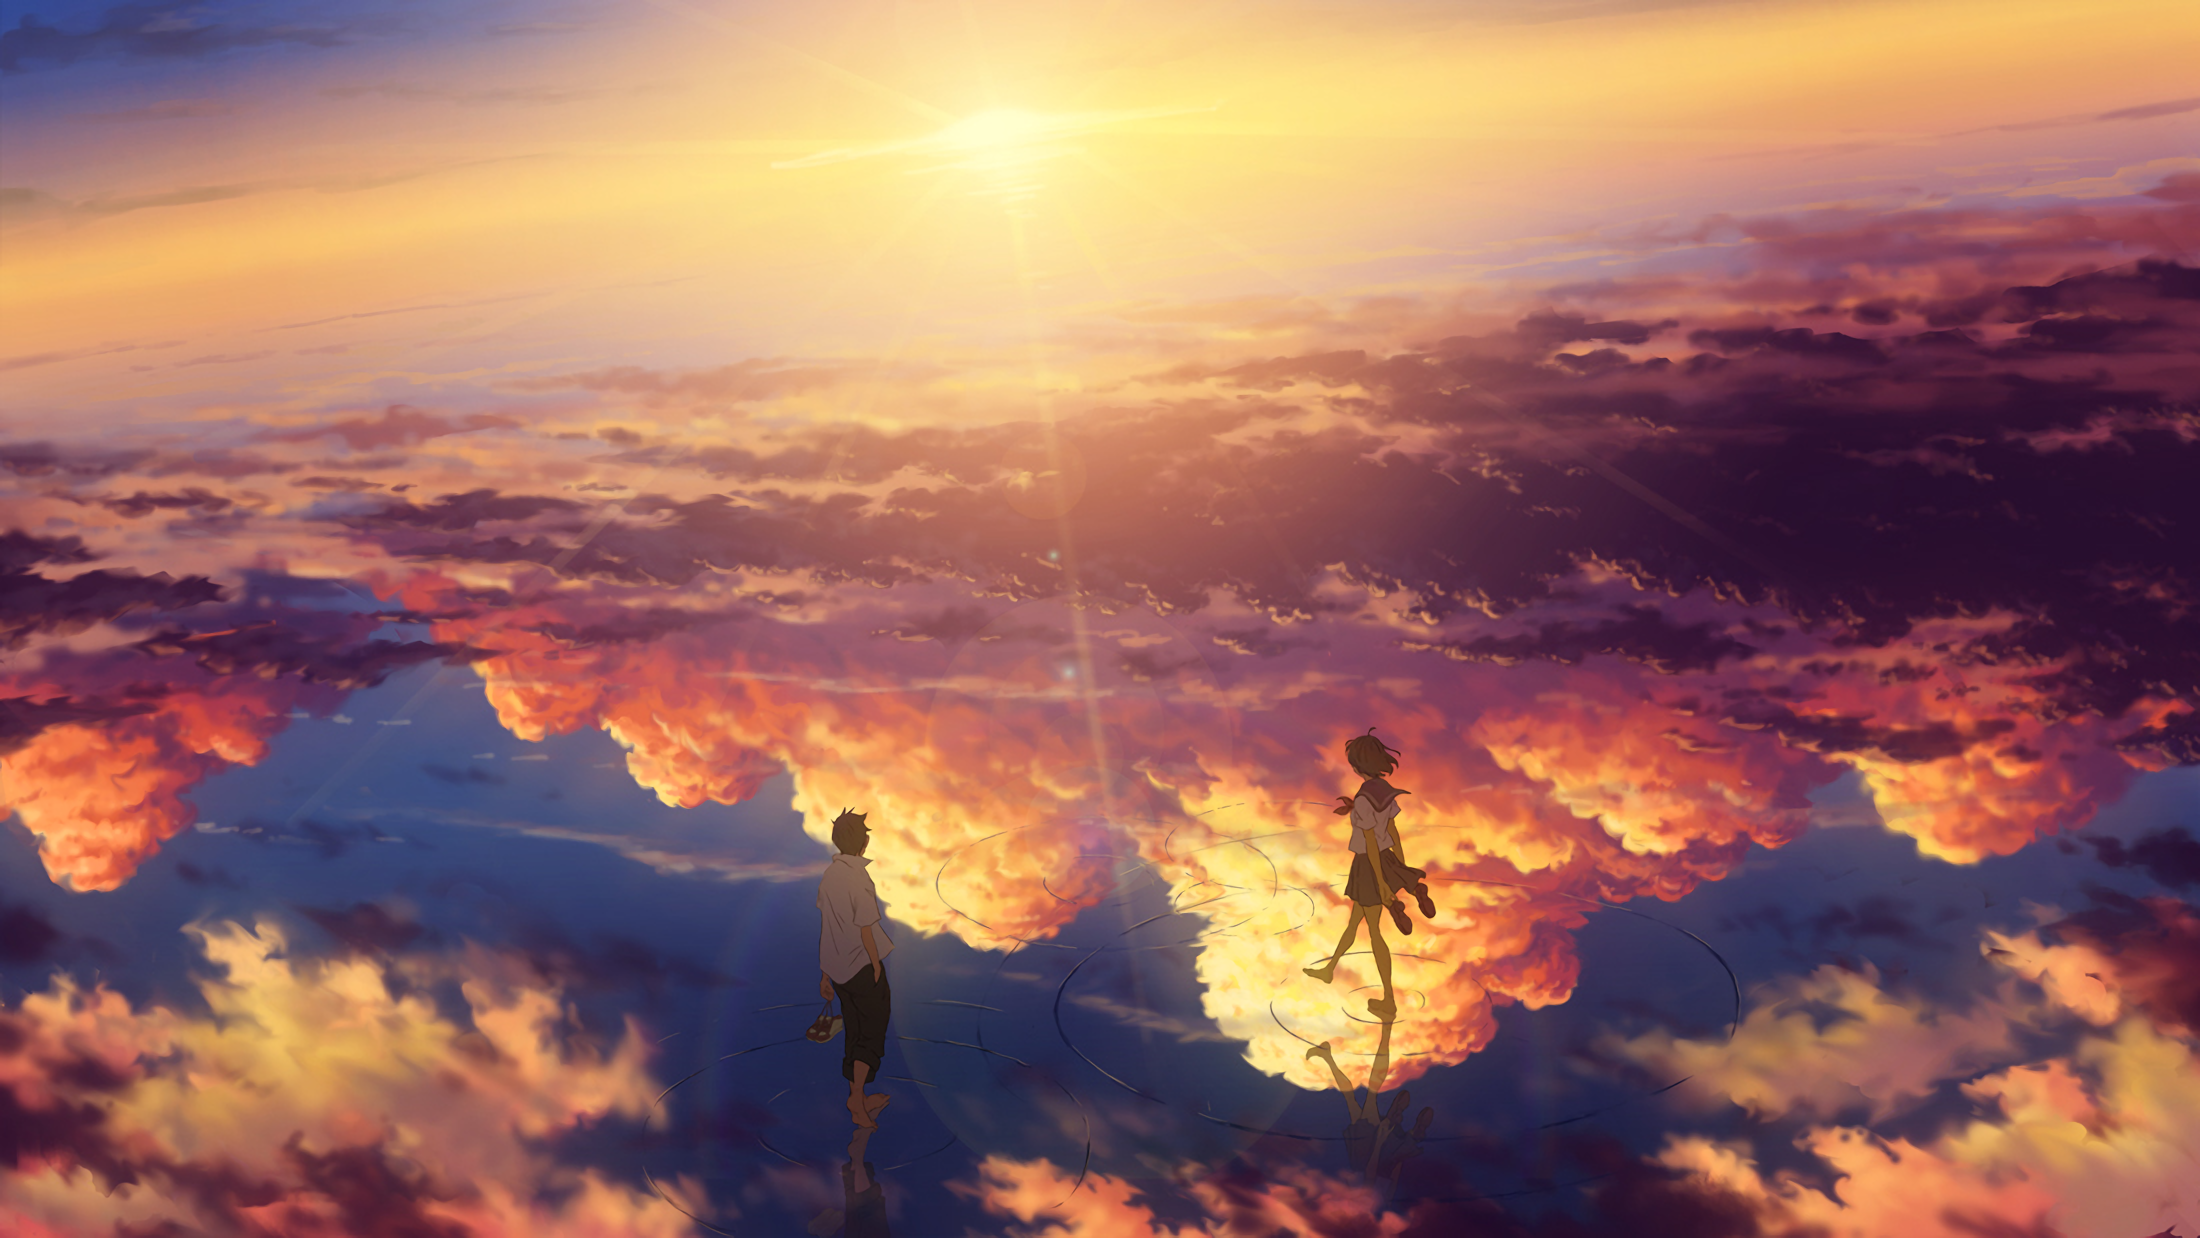 Walking on the sky by とろっち